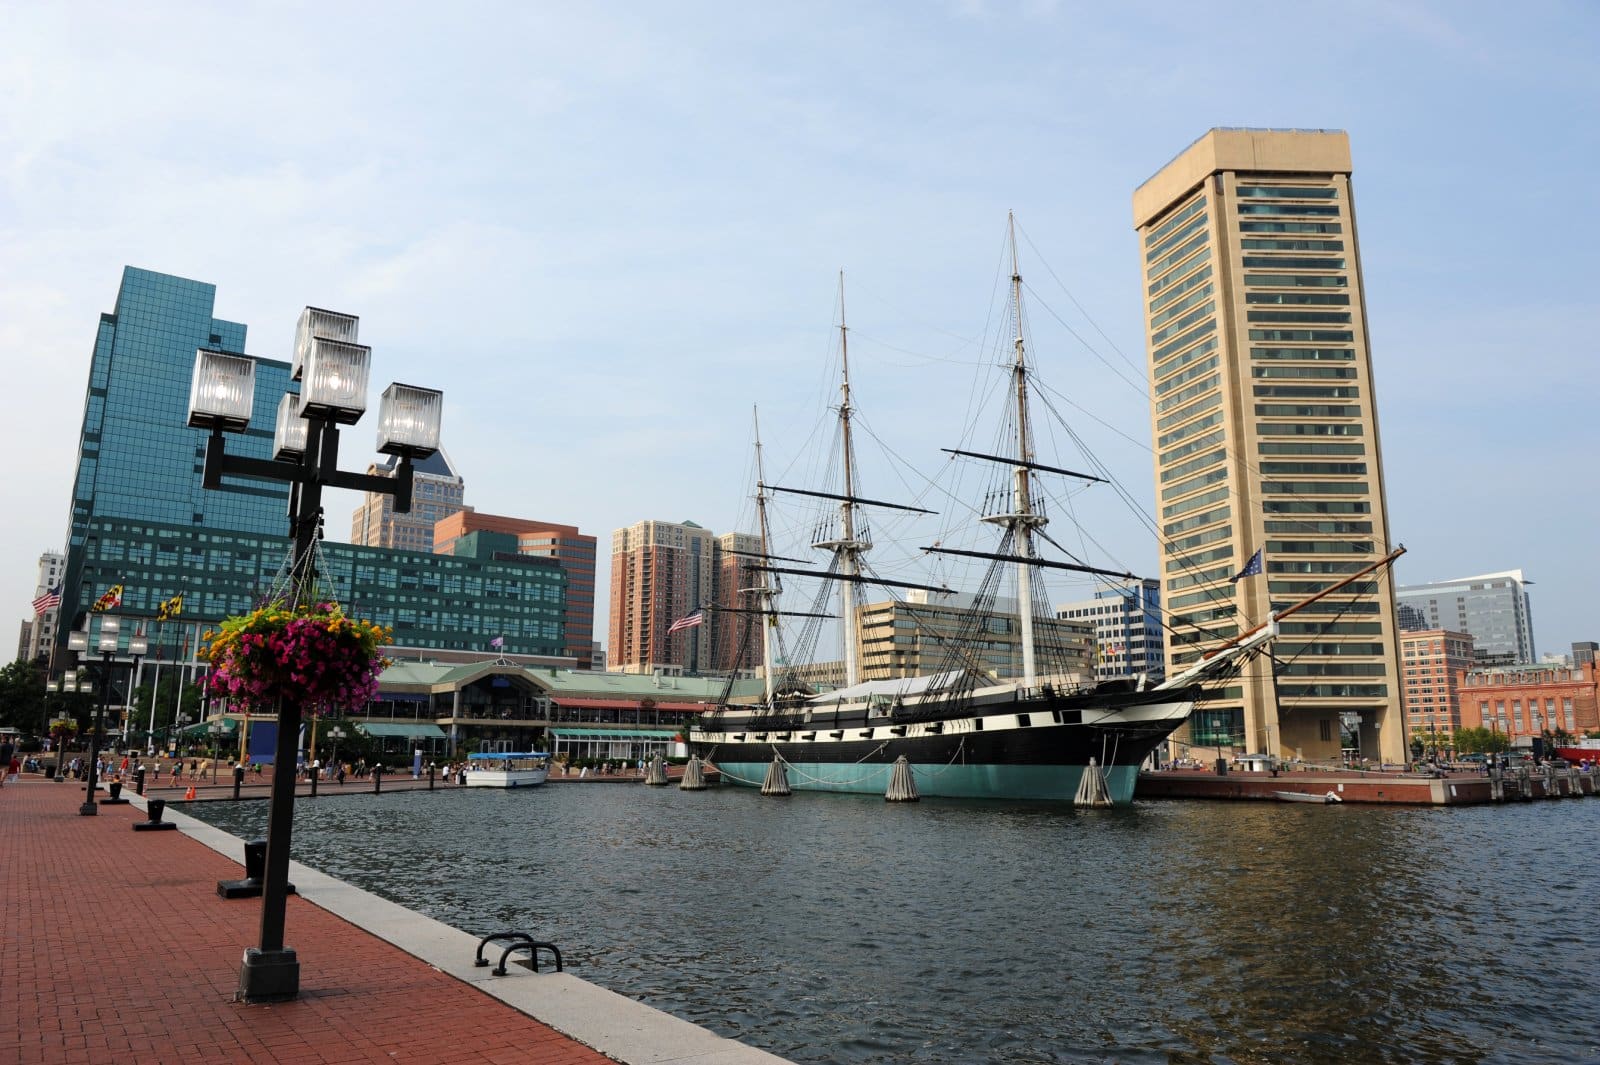 <p>With the Chesapeake Bay and historic Baltimore, Maryland enjoys tourism revenues of approximately $18 billion. Experiences like sailing tours can add a unique expense to visitors’ budgets.</p>